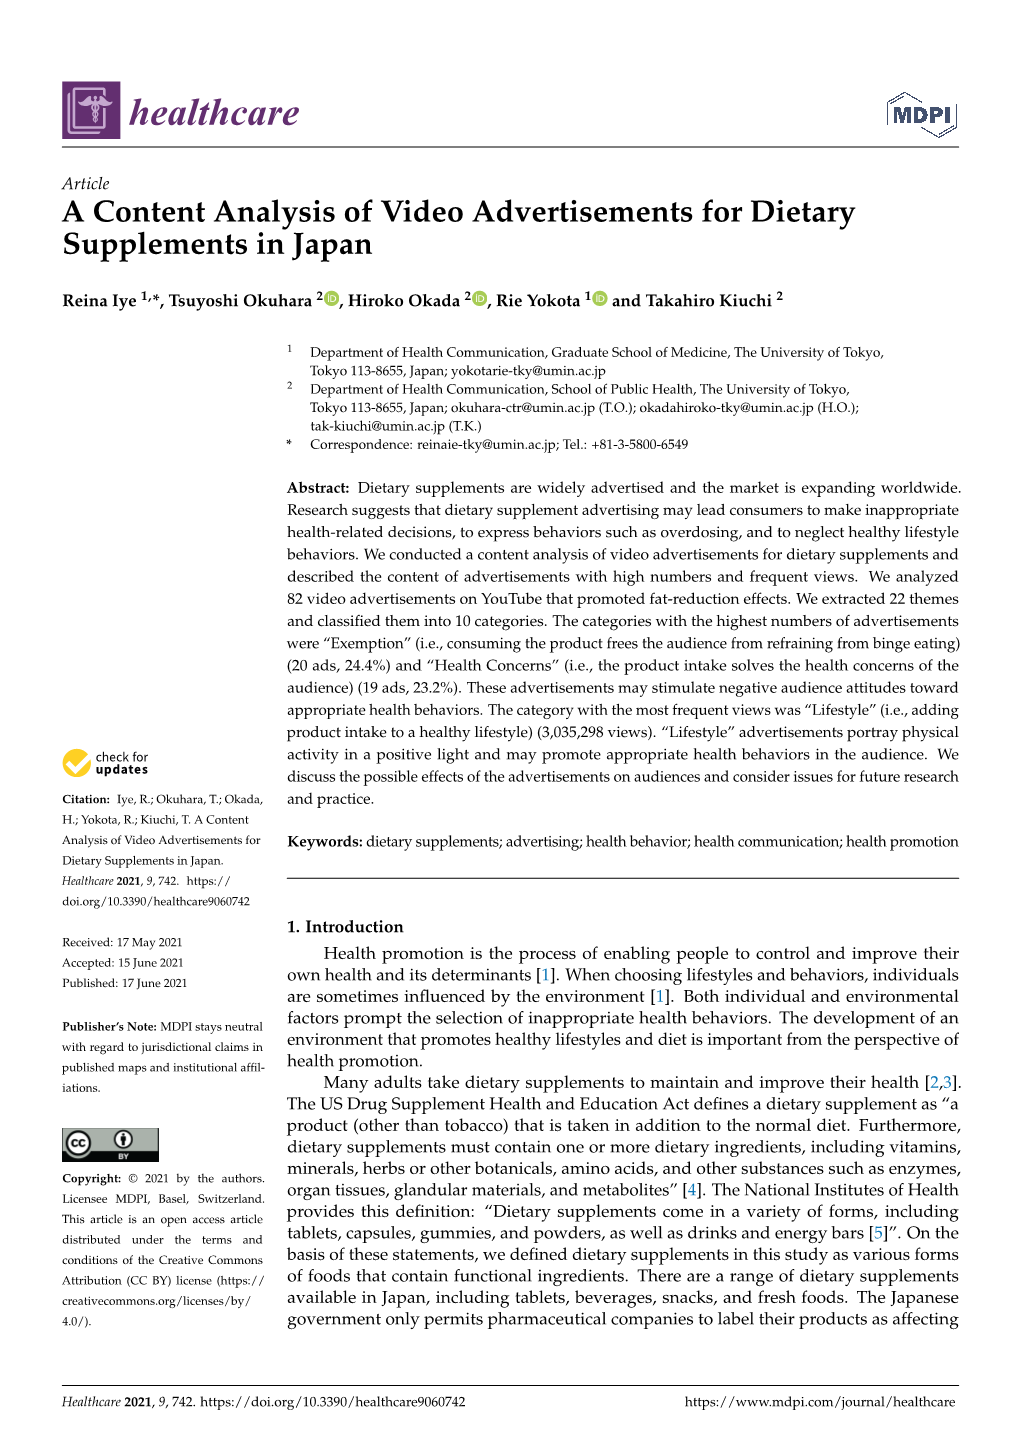 A Content Analysis of Video Advertisements for Dietary Supplements in Japan